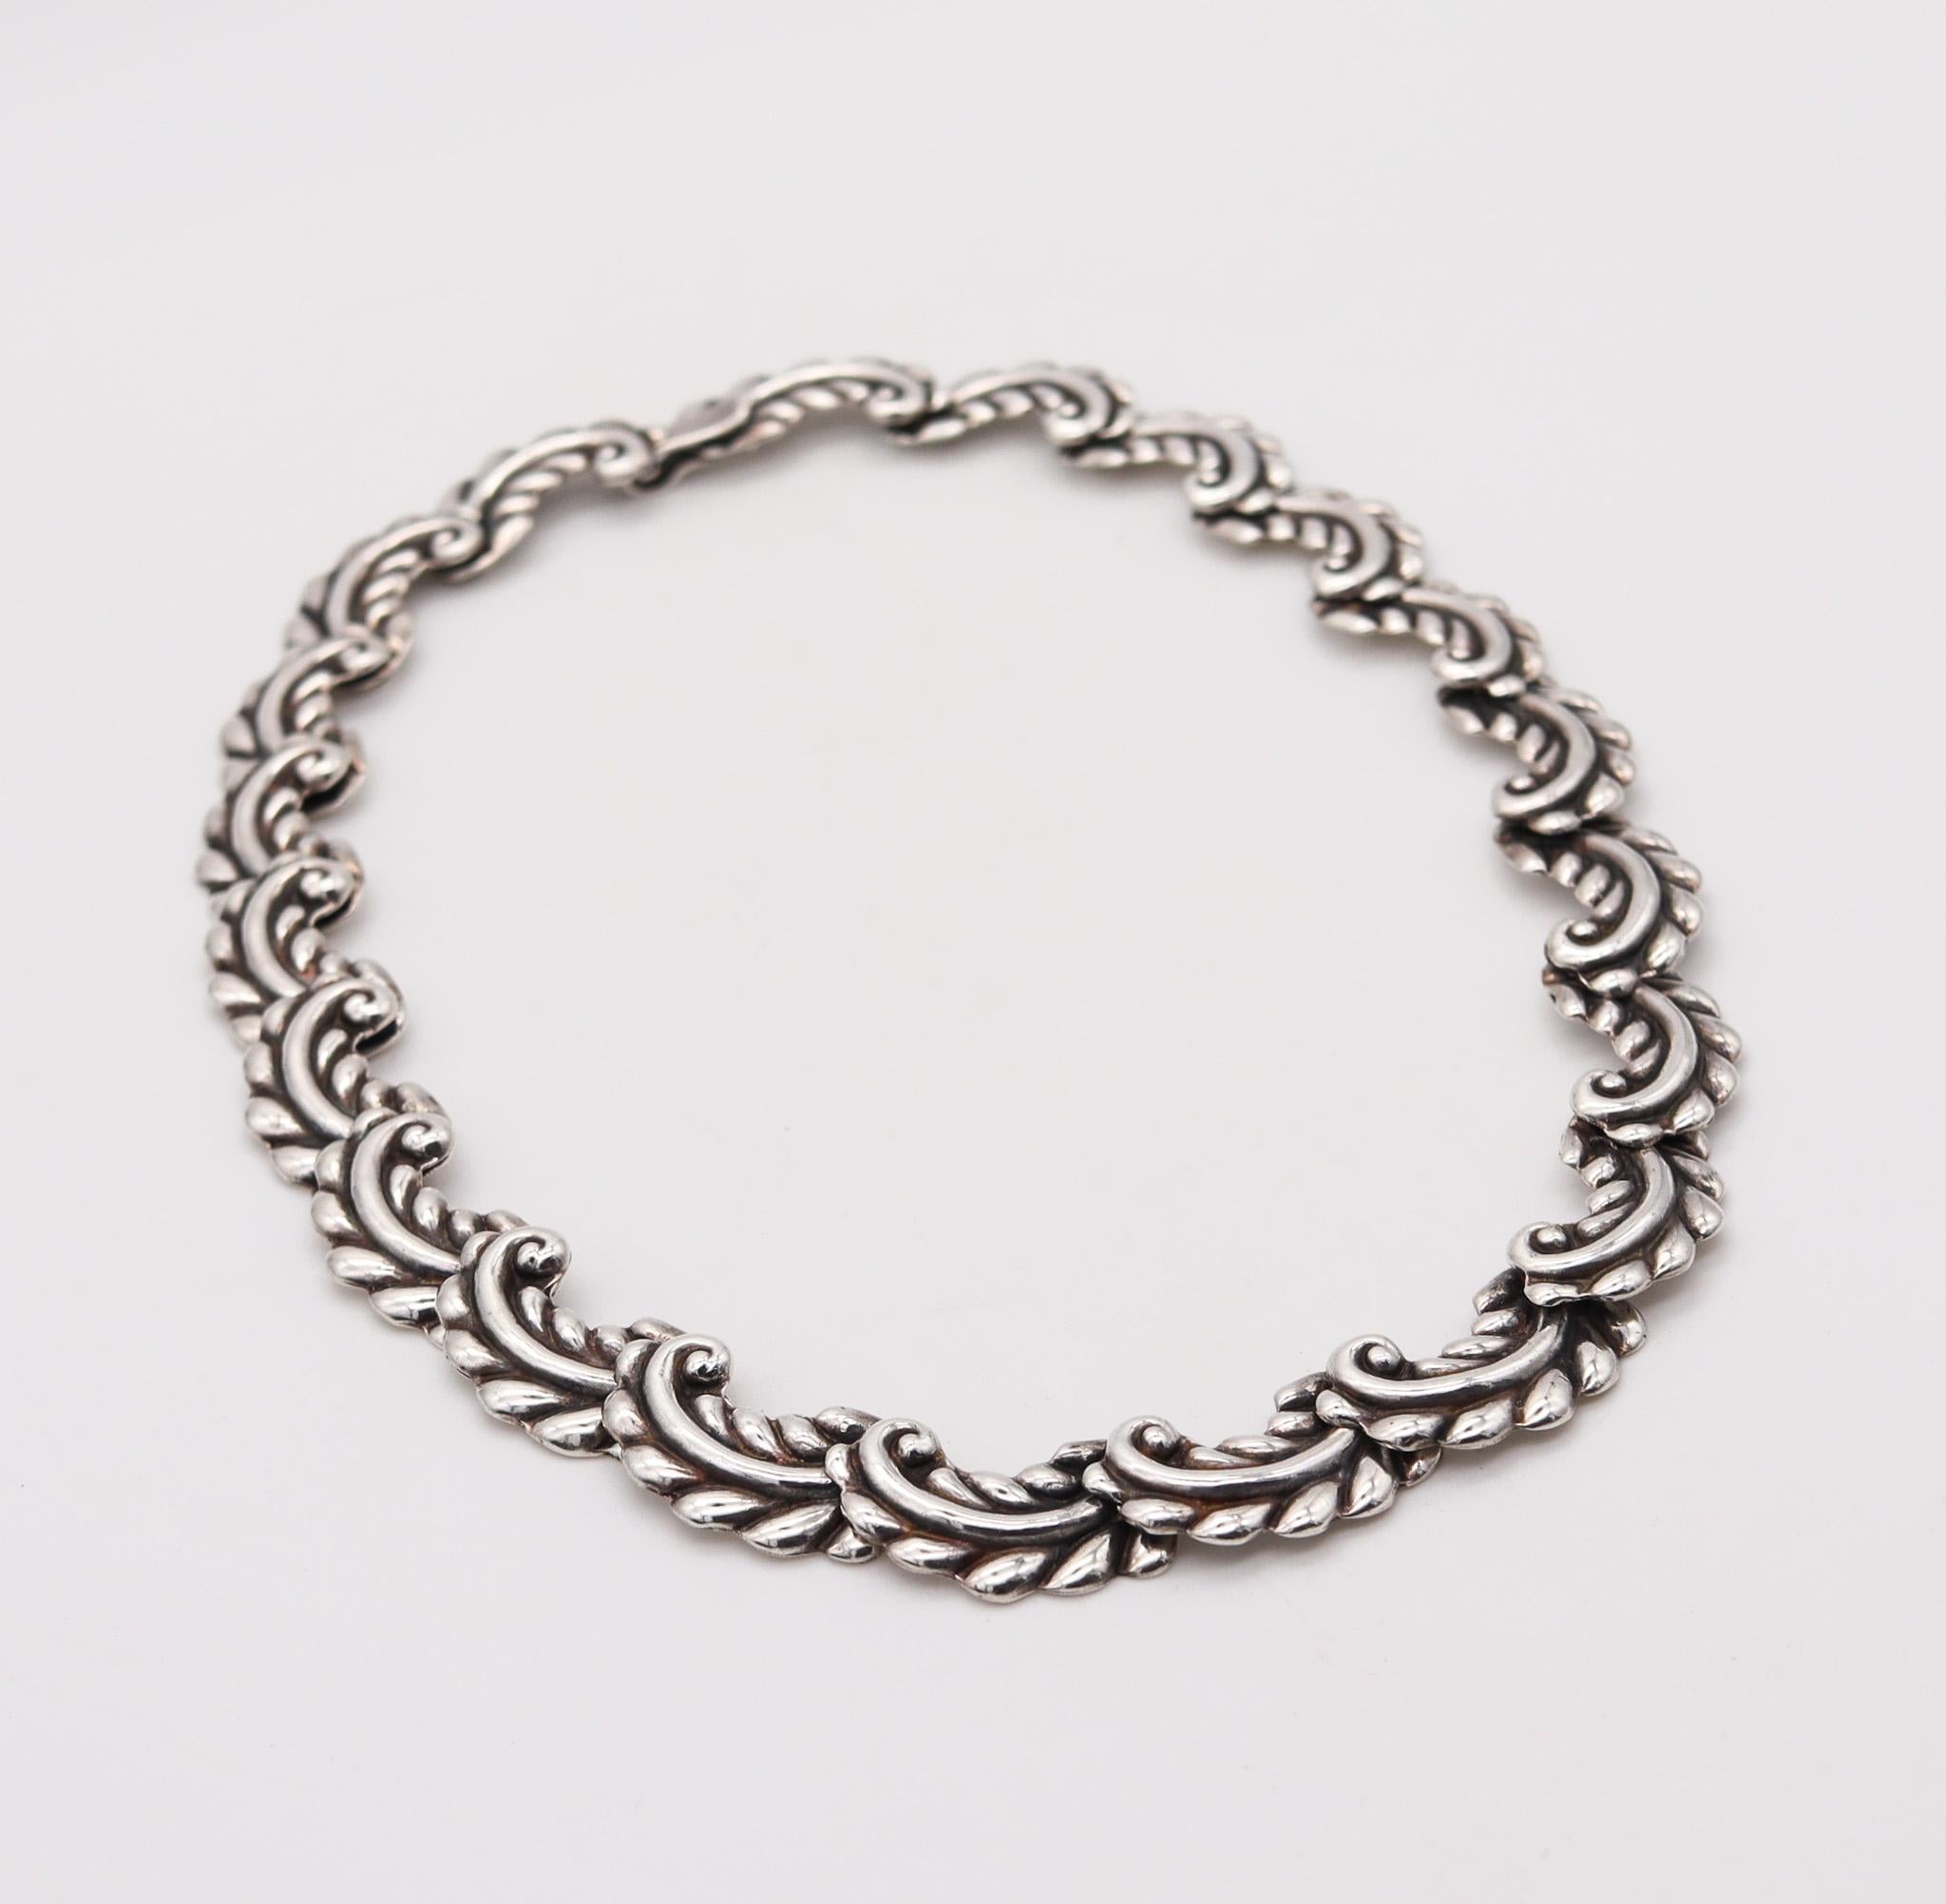 Antonio Reina 1950 Mexican Taxco Organic Necklace In Solid .925 Sterling Silver For Sale 1